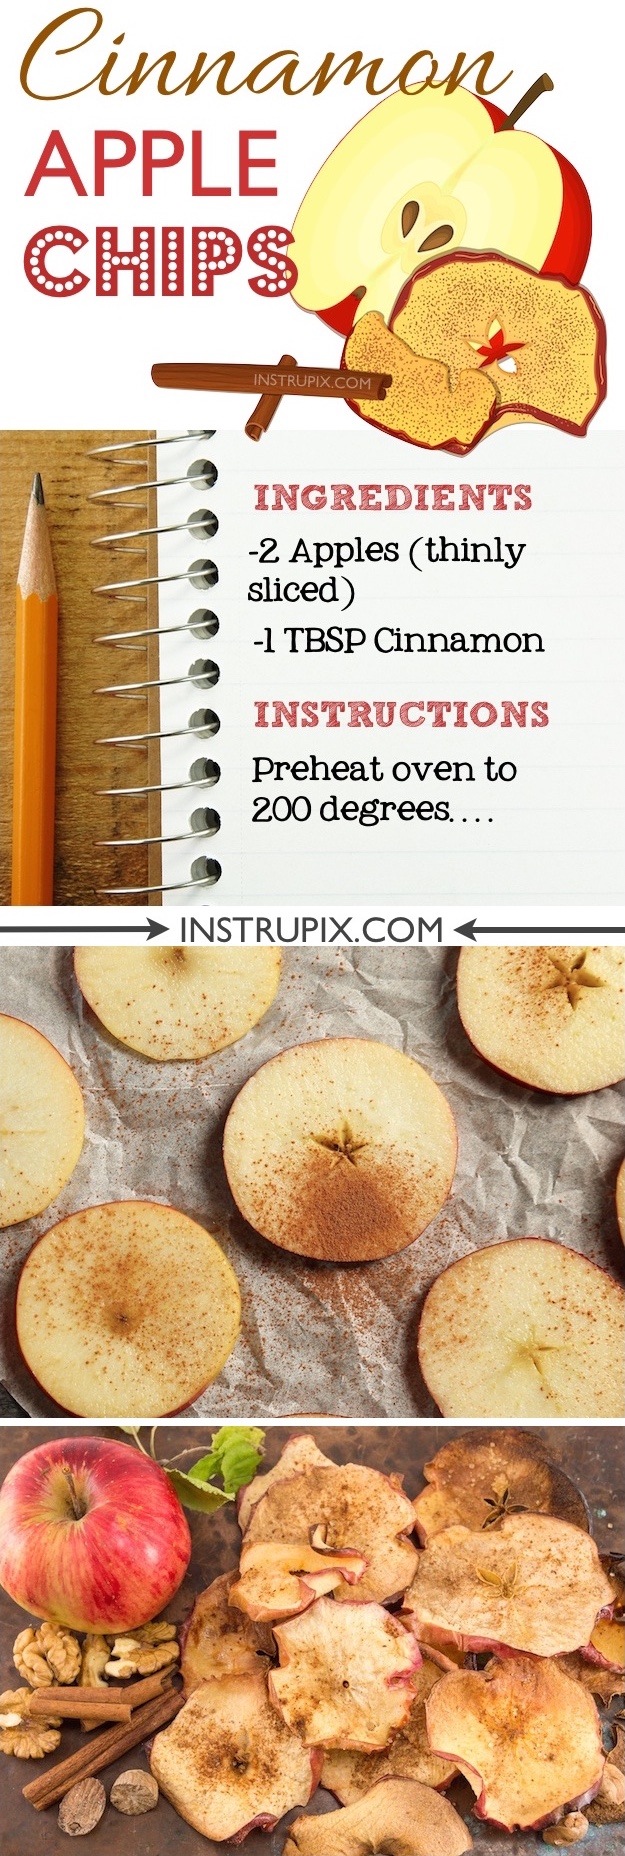 Healthy homemade baked apple chips recipe in the oven! Quick and easy with only 2 ingredients! Instrupix.com